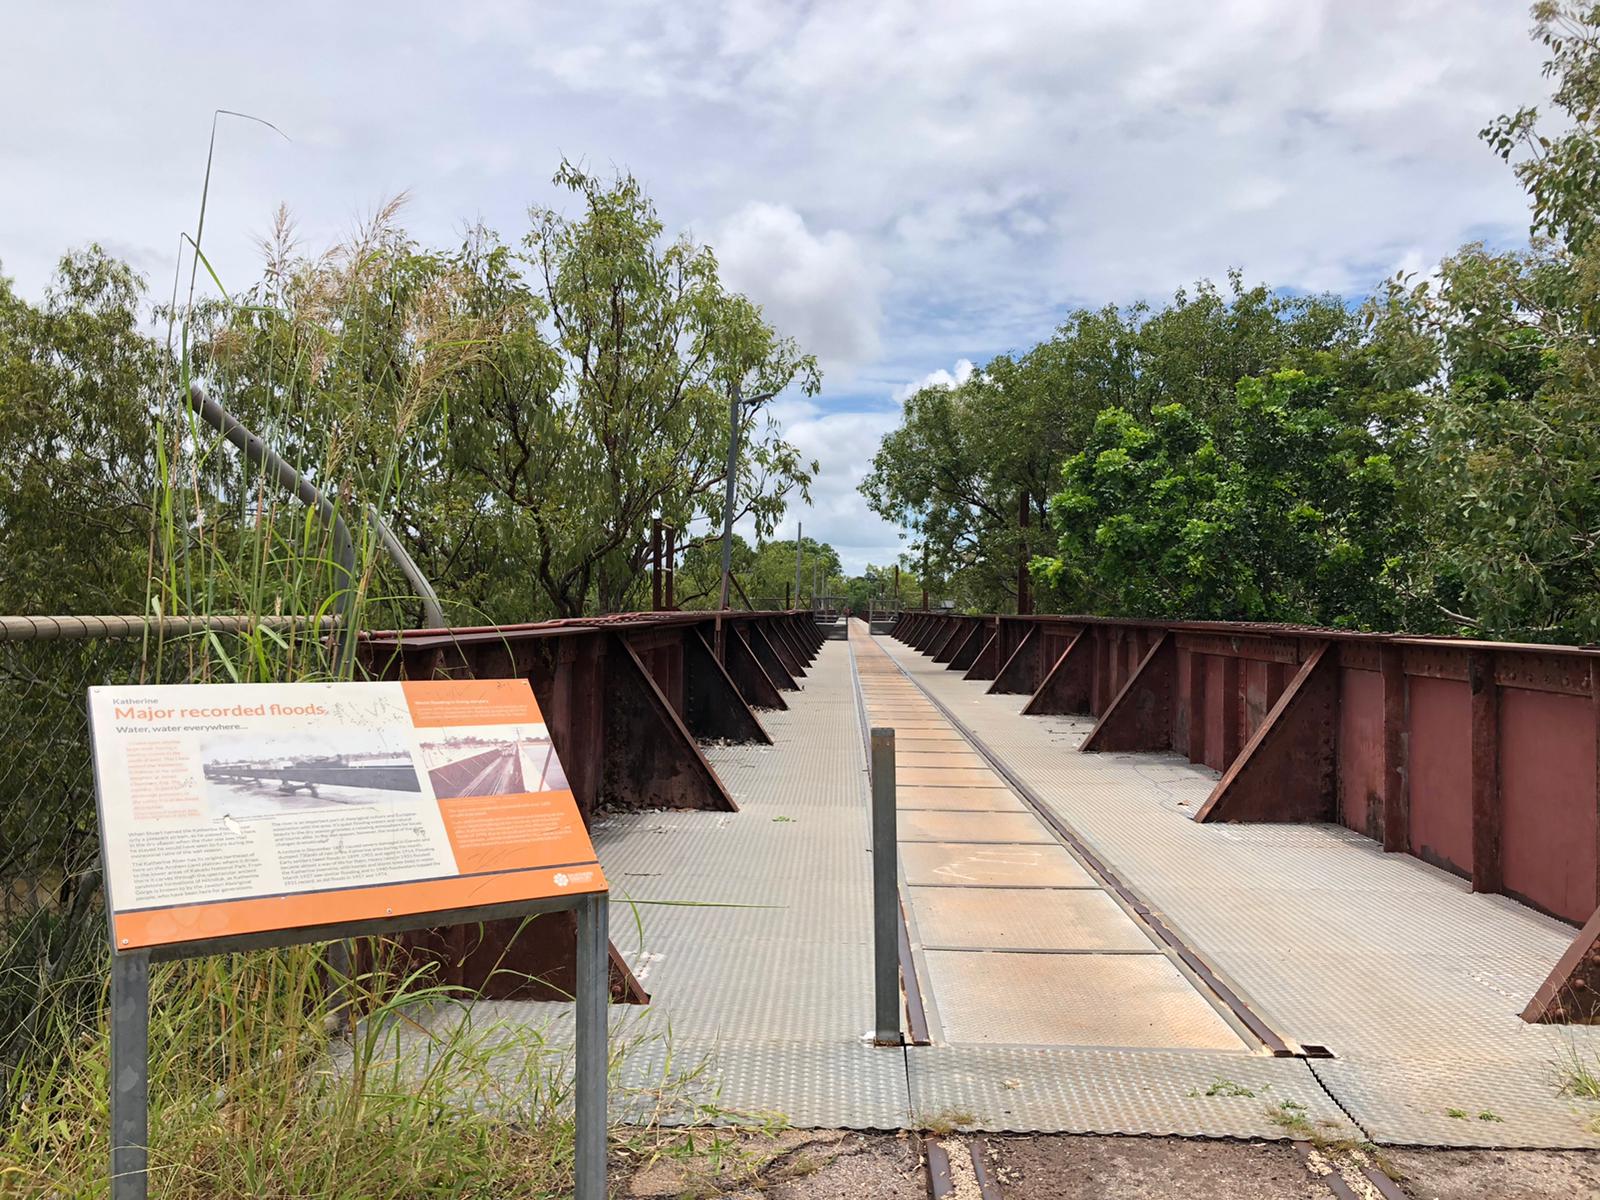 Waking/bike track which connects around the town: the old rail trail